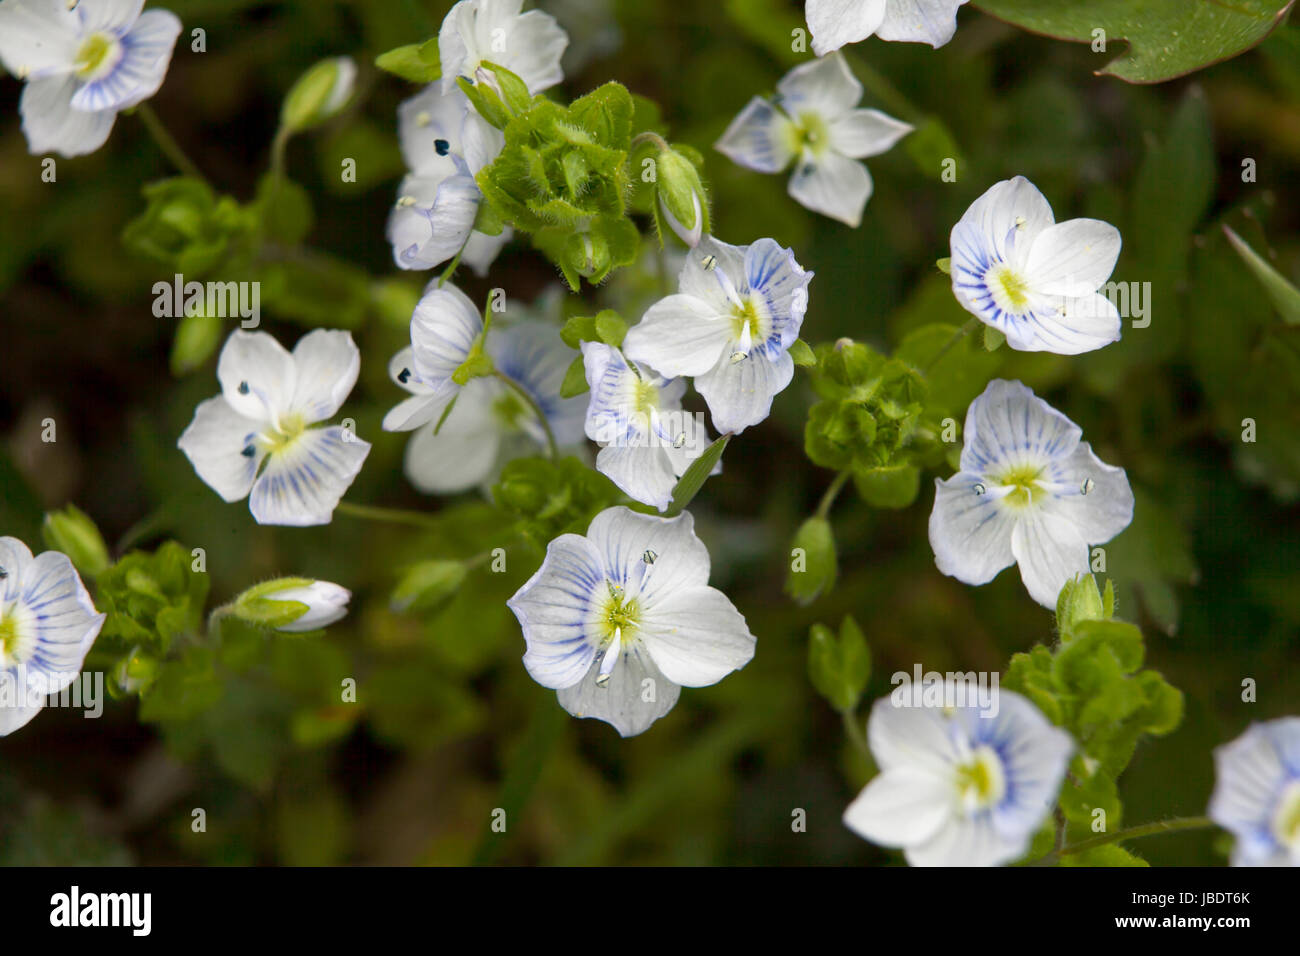 Blue ivy leaved speedwell Veronica hederifolia ssp hederifolia flowering plant Stock Photo